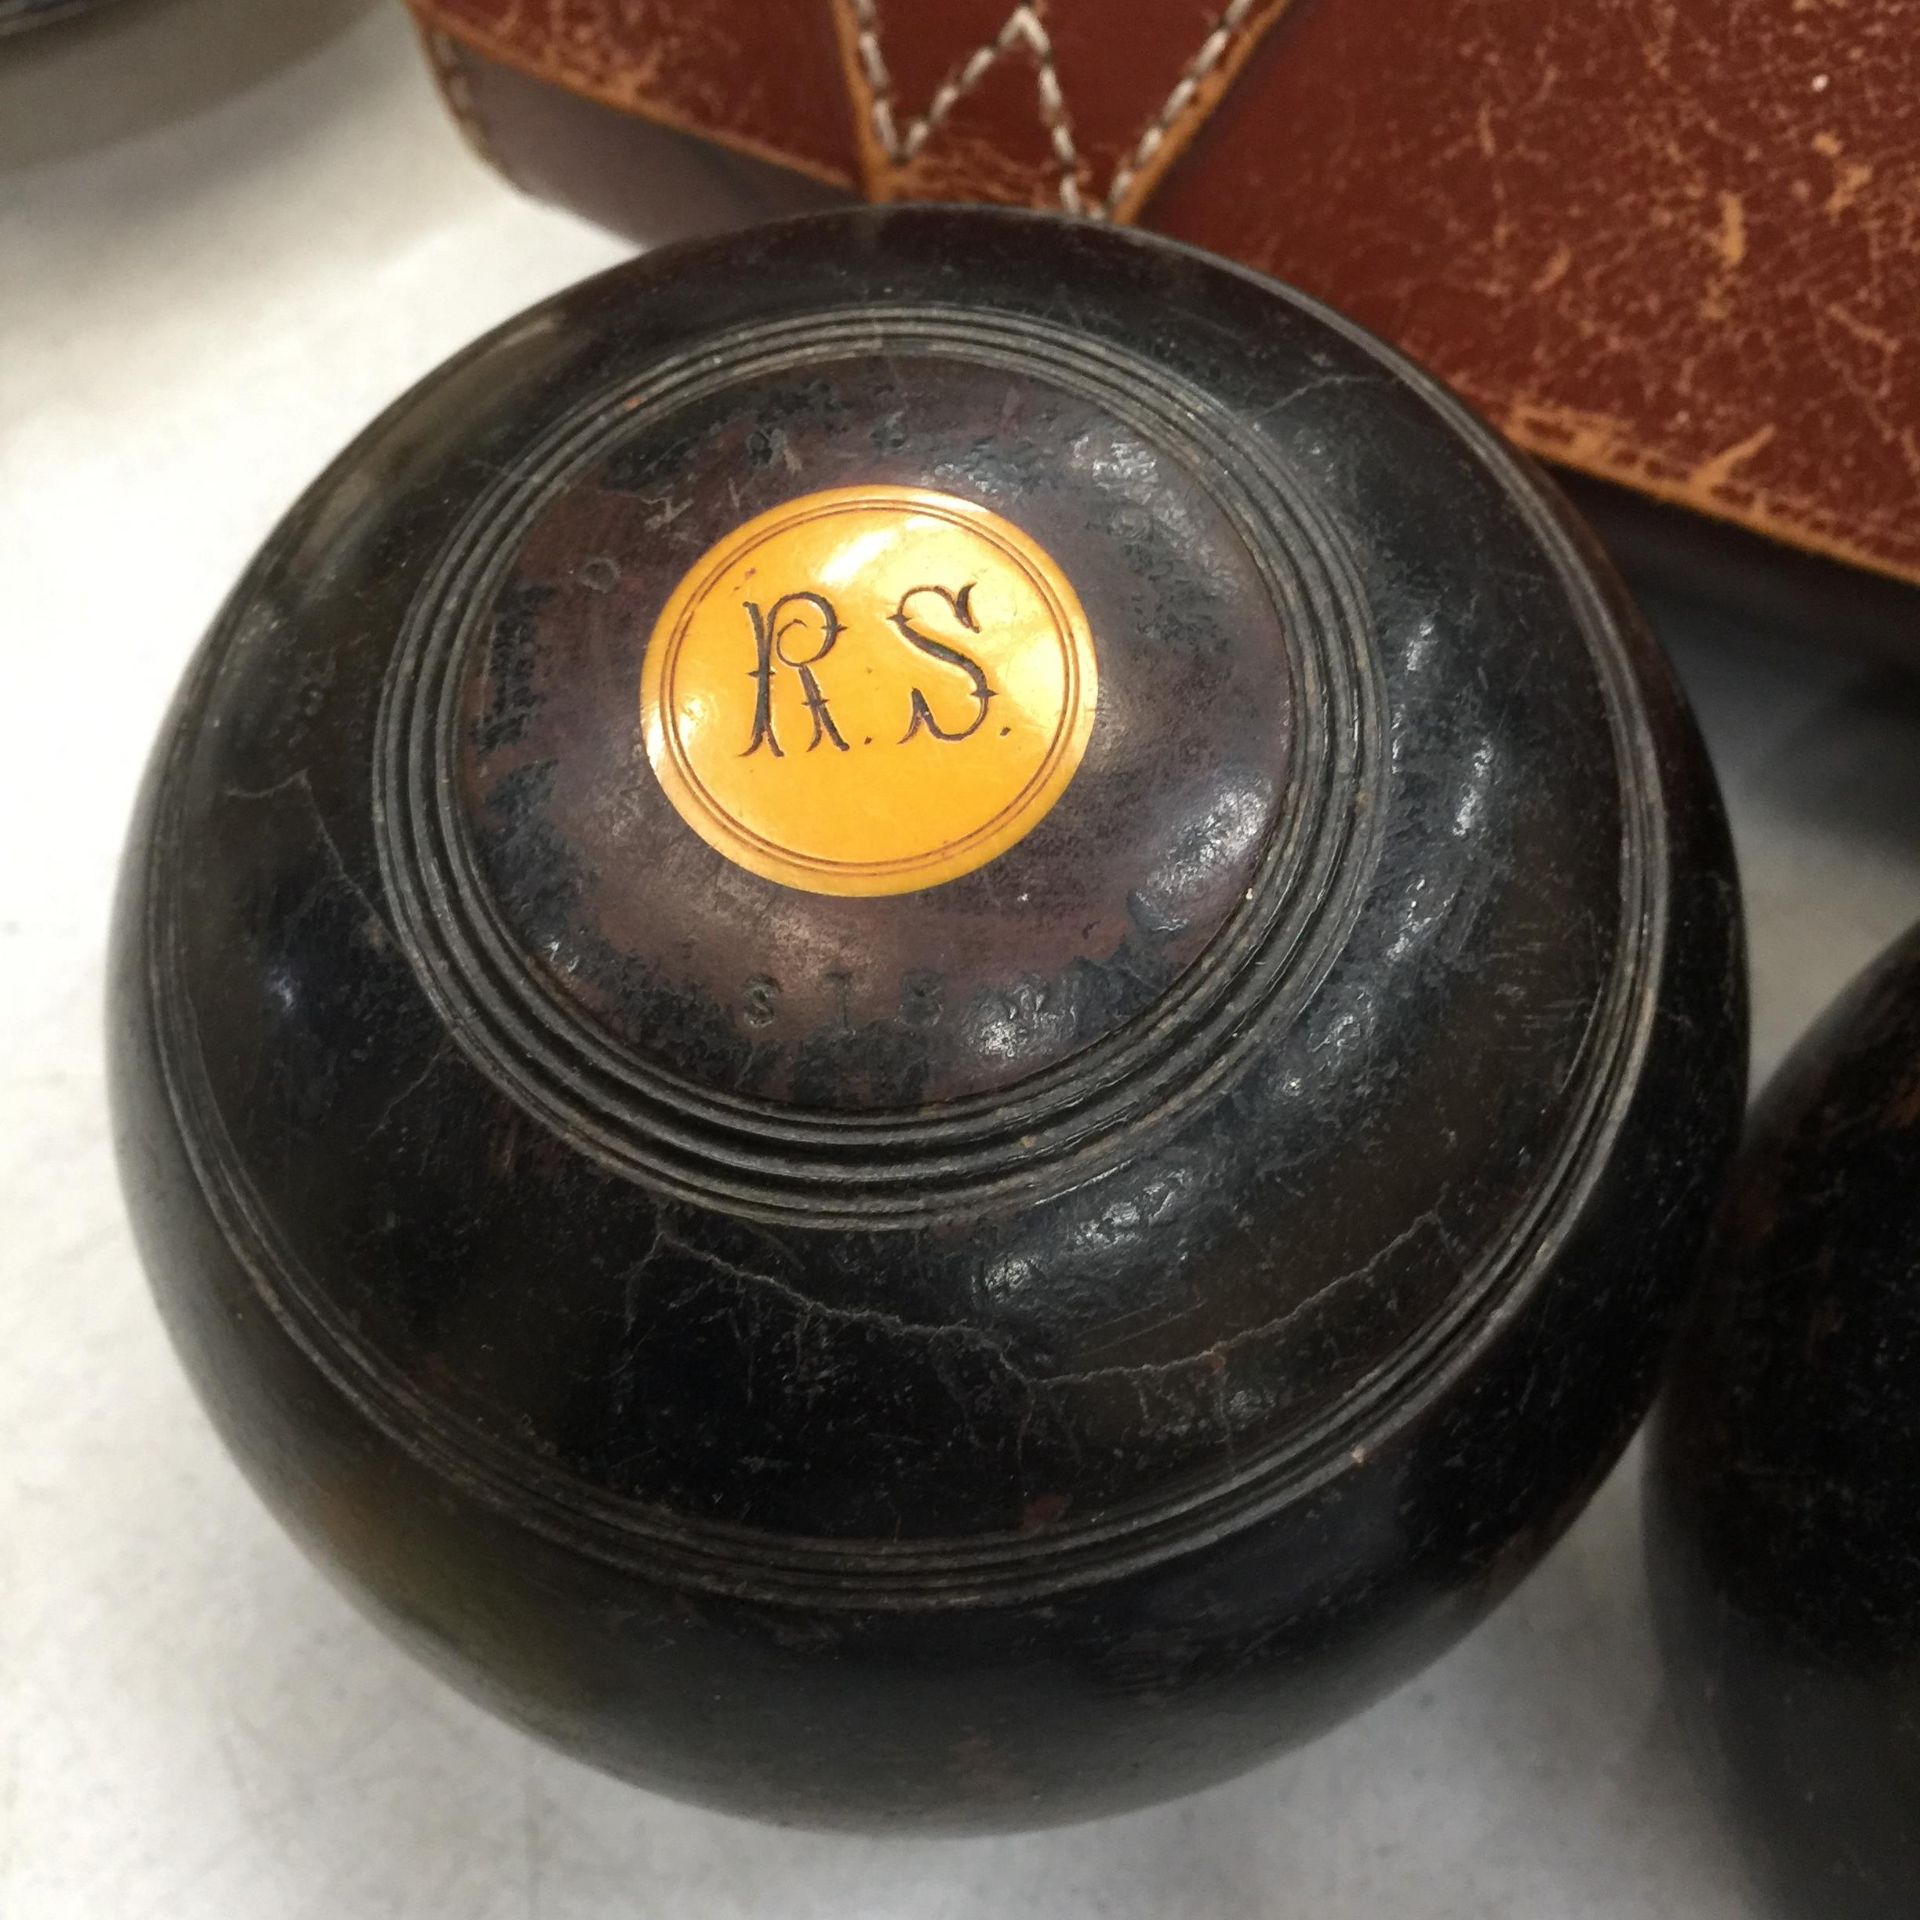 A SET OF VINTAGE BOWLS IN A LEATHER CASE - Image 2 of 2